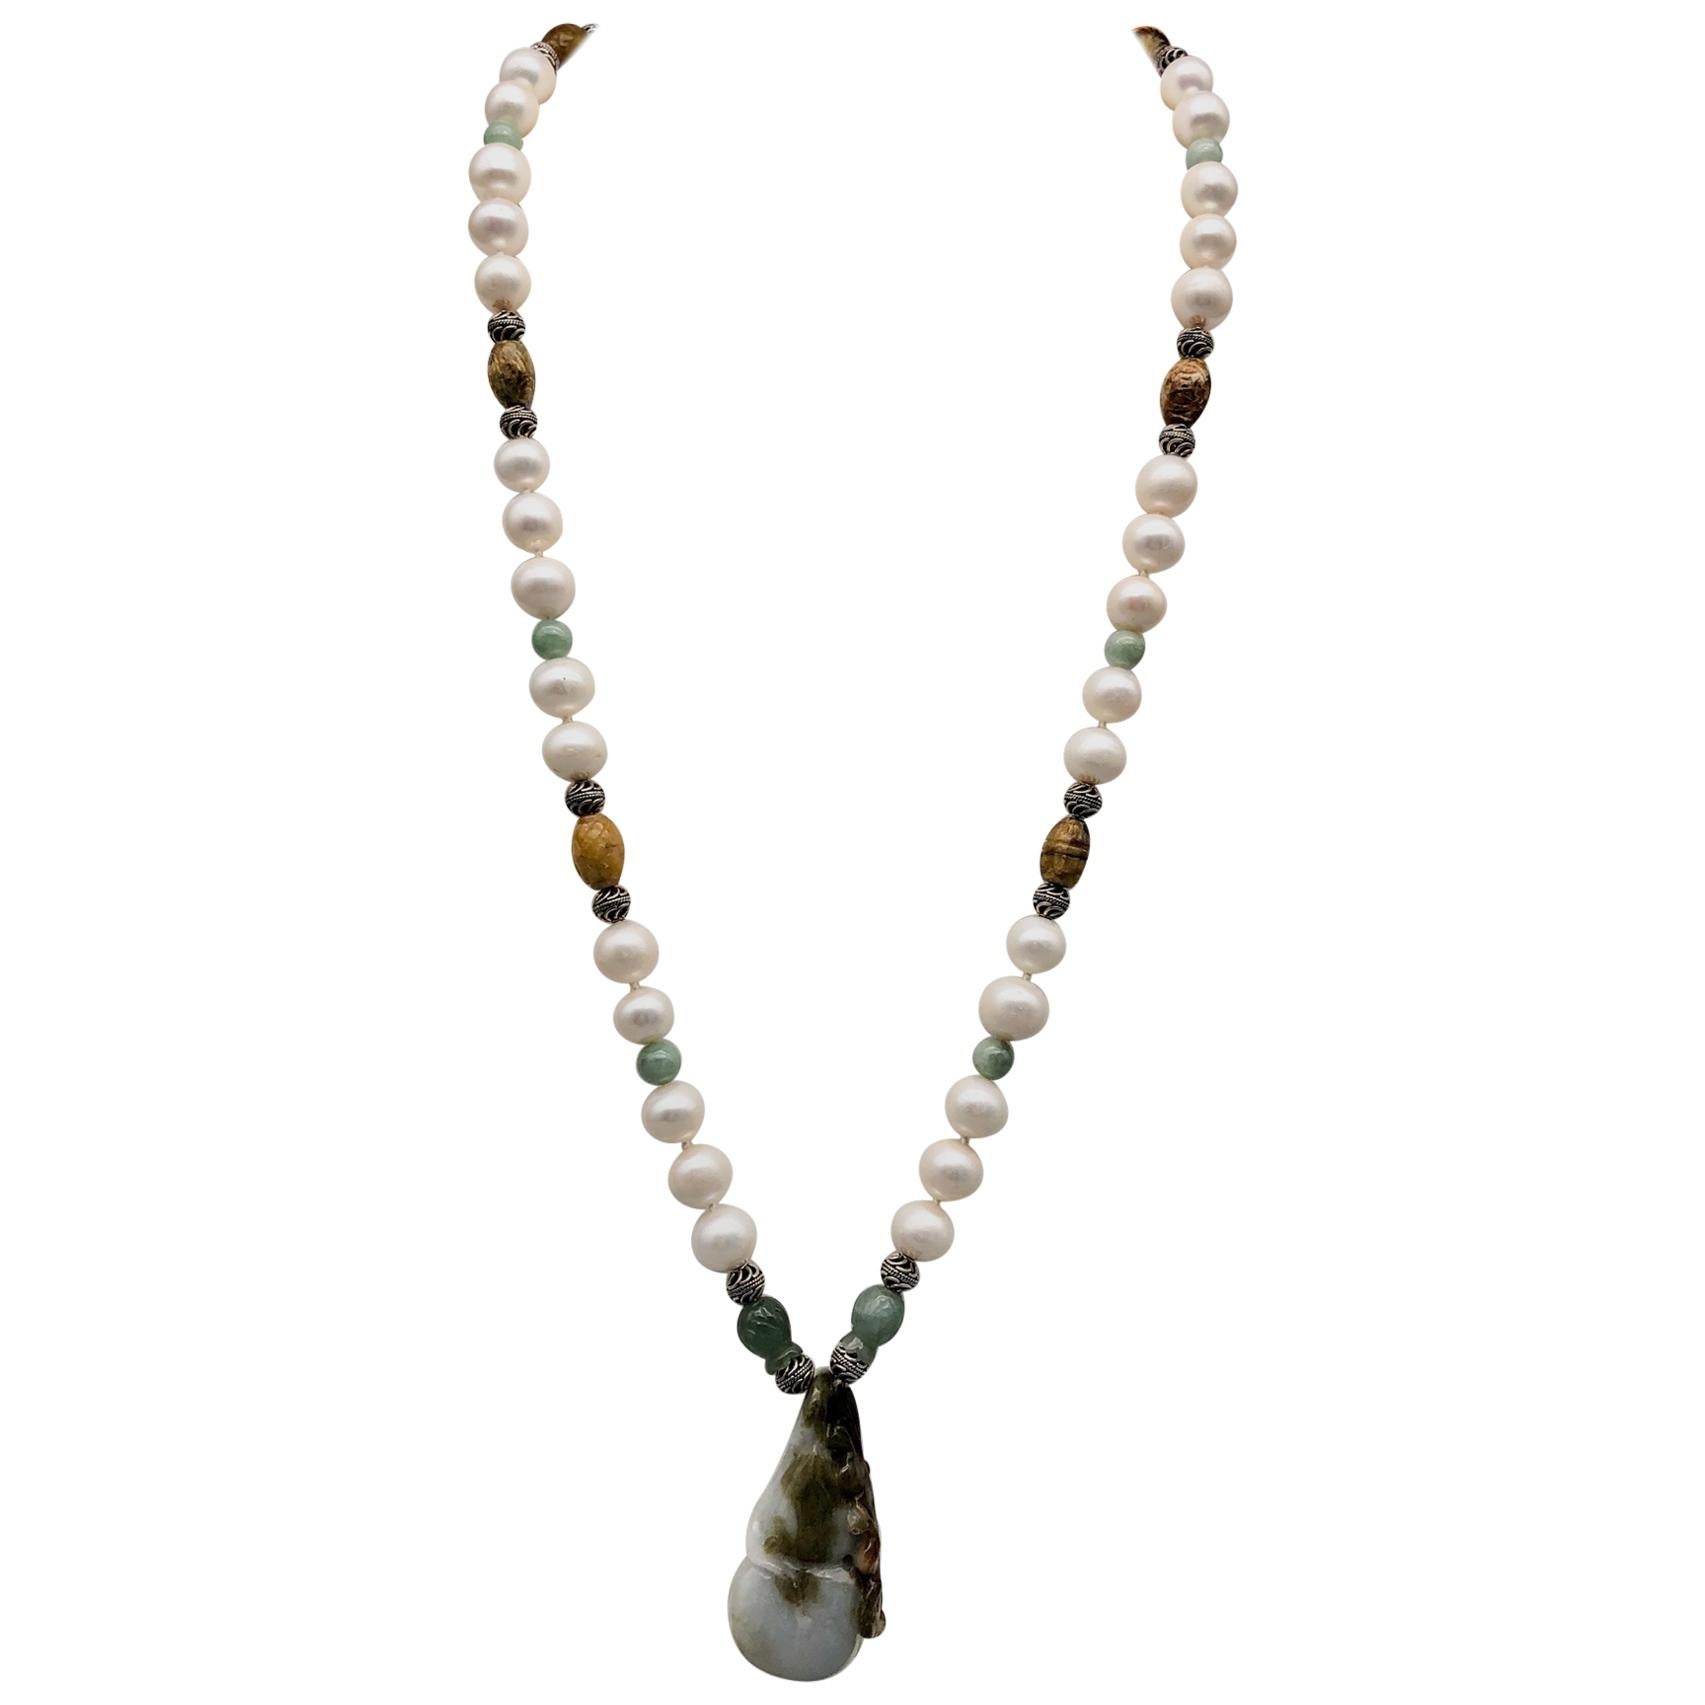 One-of-a-Kind
Step into a world of elegance and sophistication with this exquisite necklace, featuring a stunning carved peach blossom Jade pendant that anchors the piece with its unique beauty and intricate details. The pendant is just the